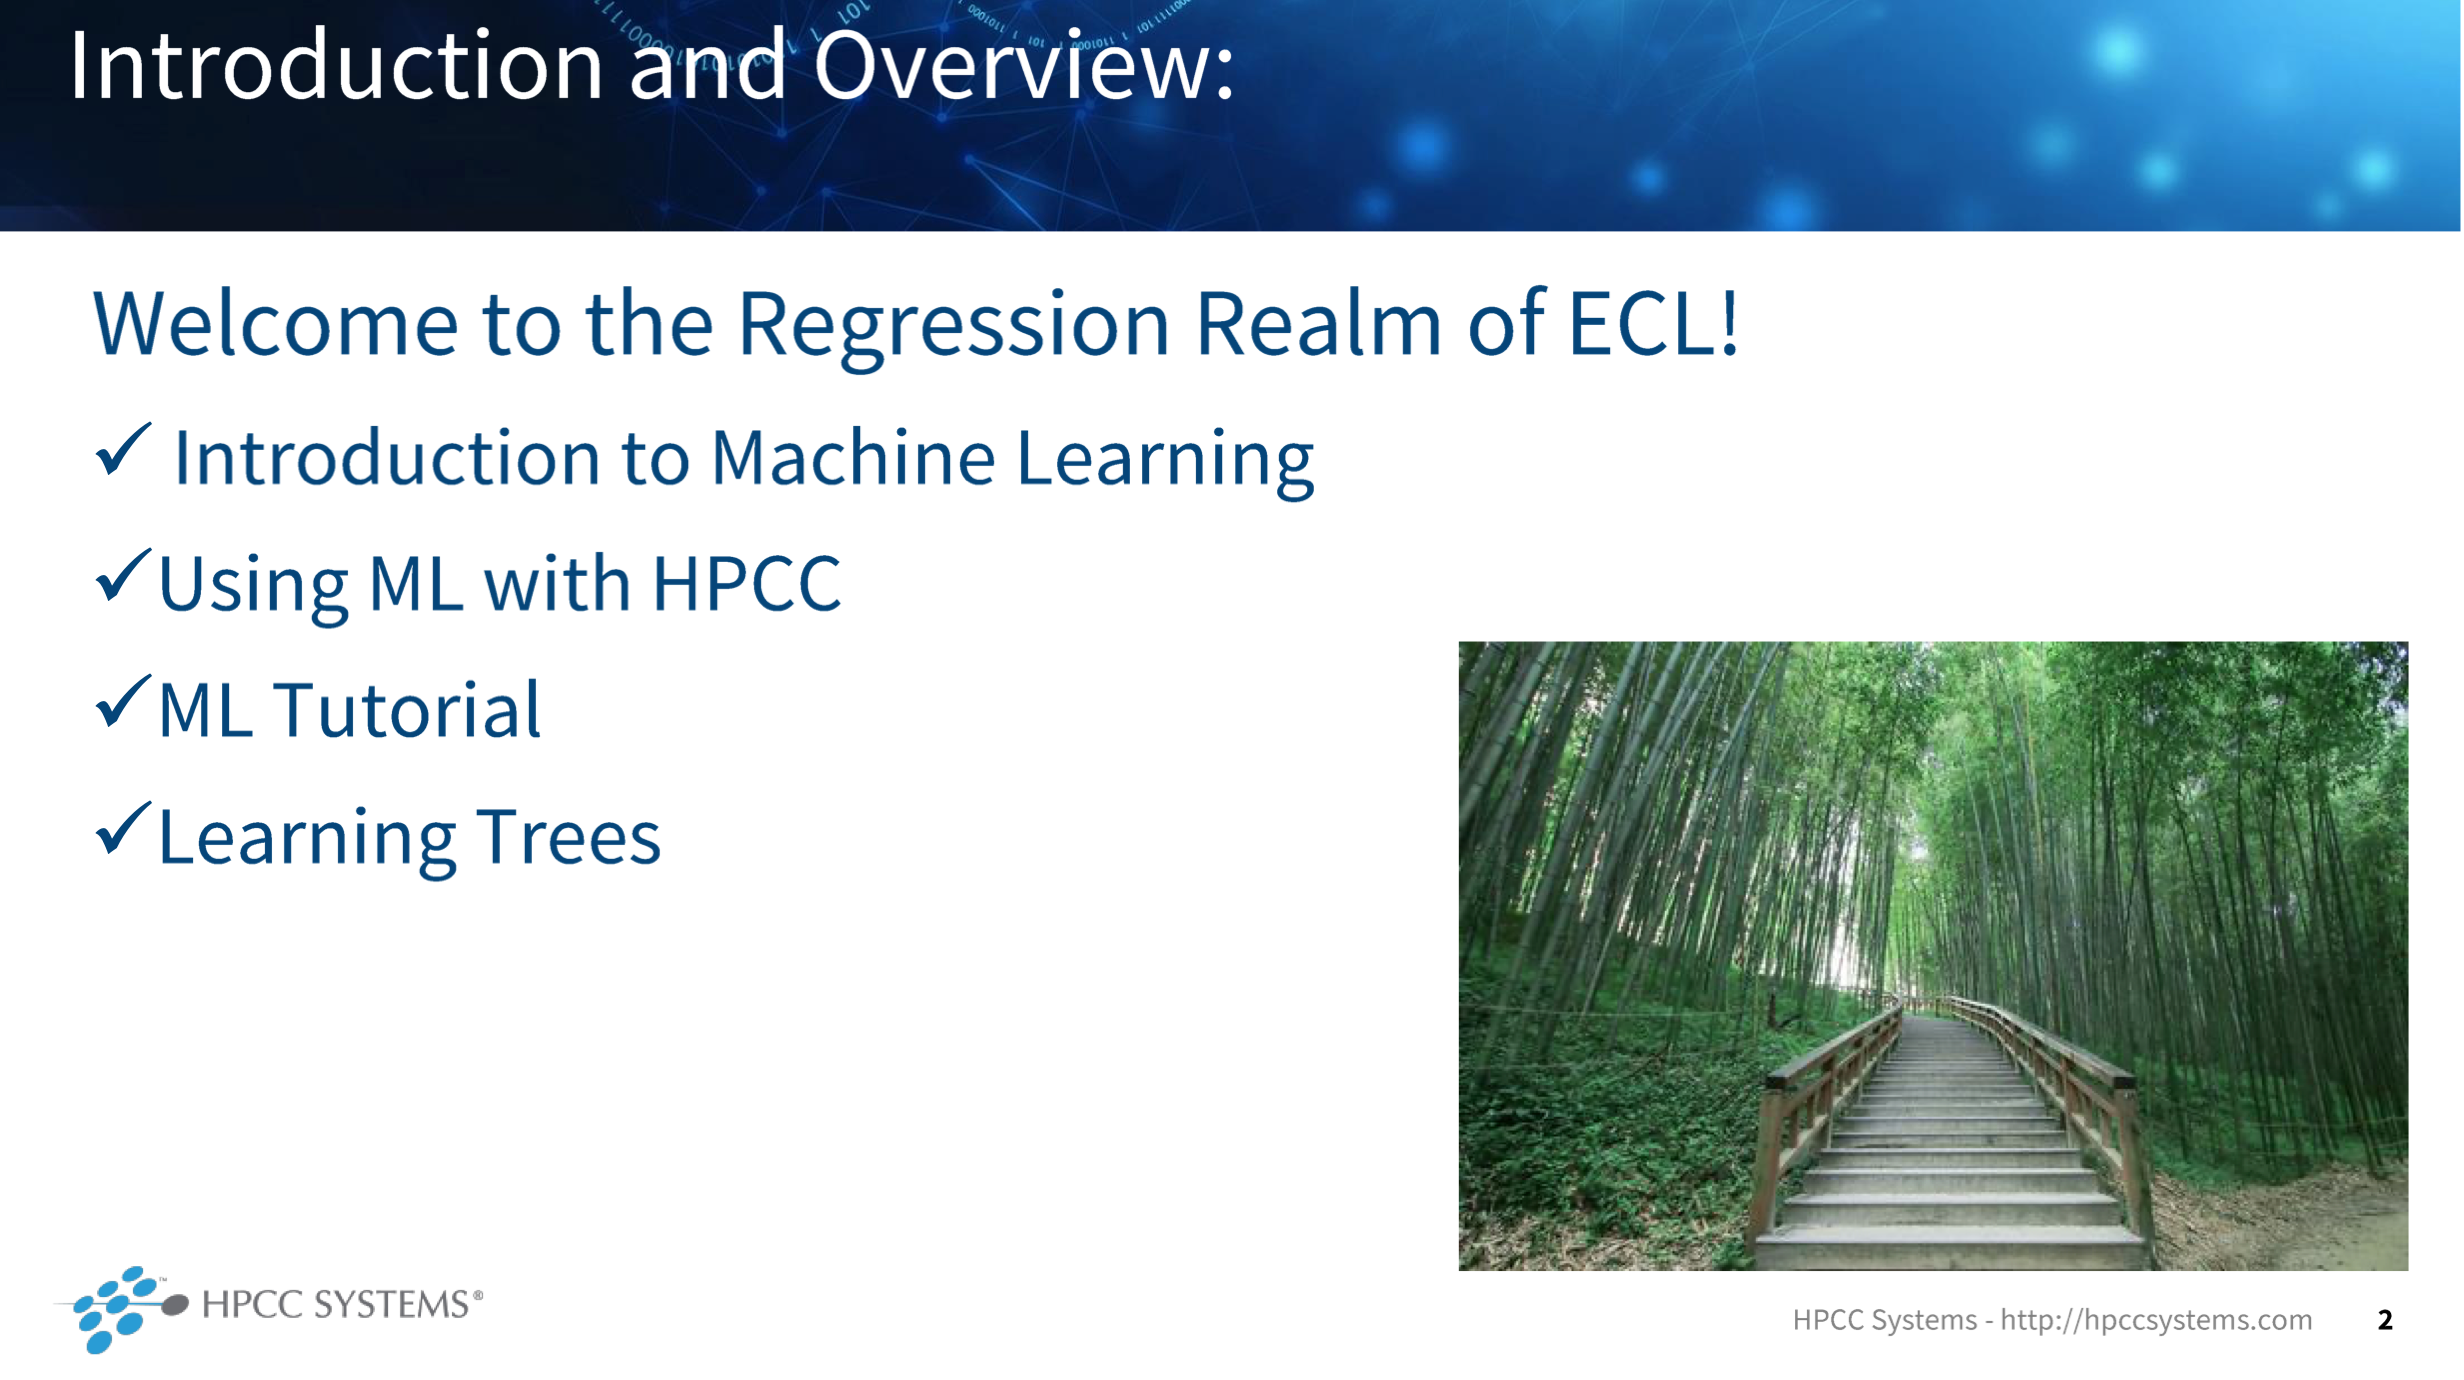 Image showing the course content for The Regression Realm